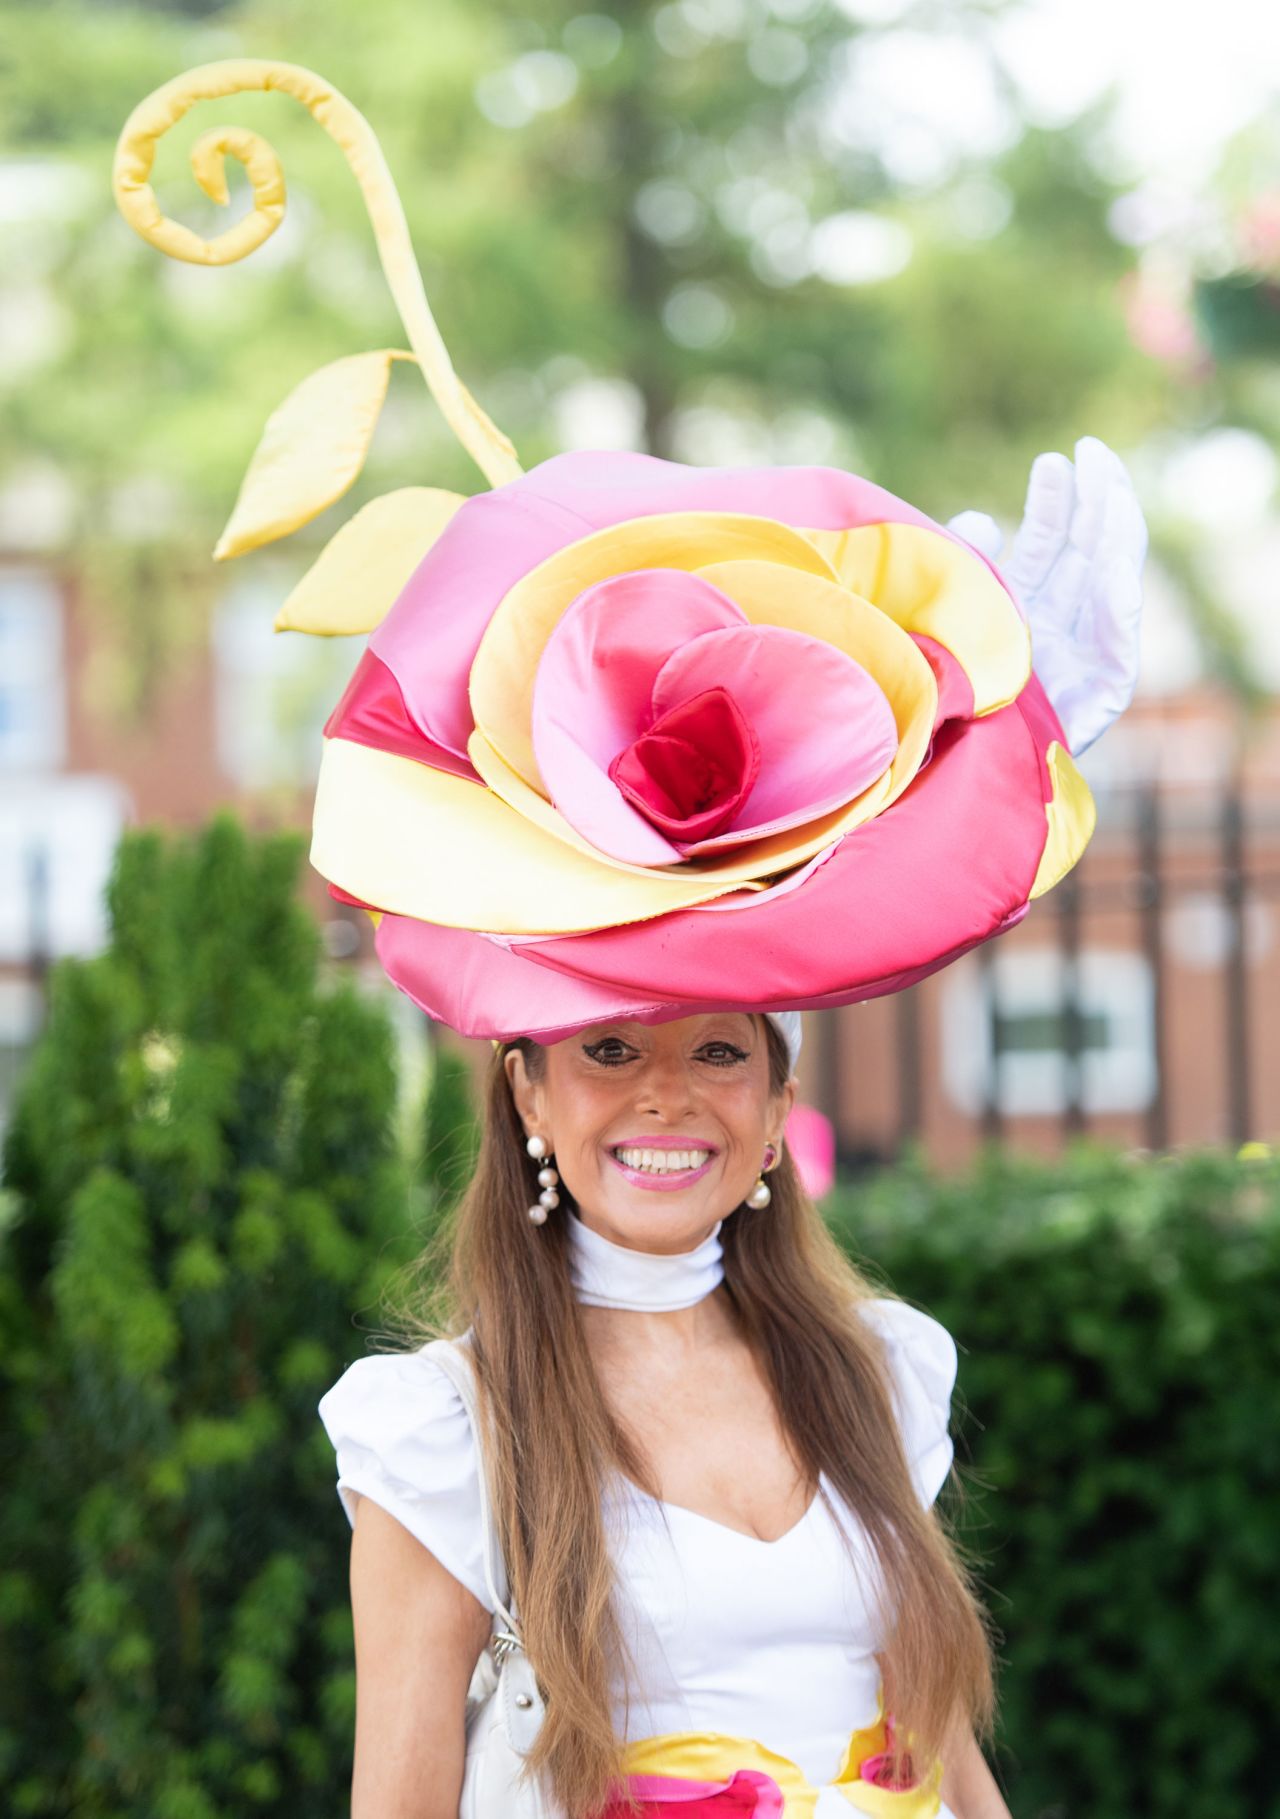 A giant rose complete with freestanding stem is the crowning feature of this racegoers look.